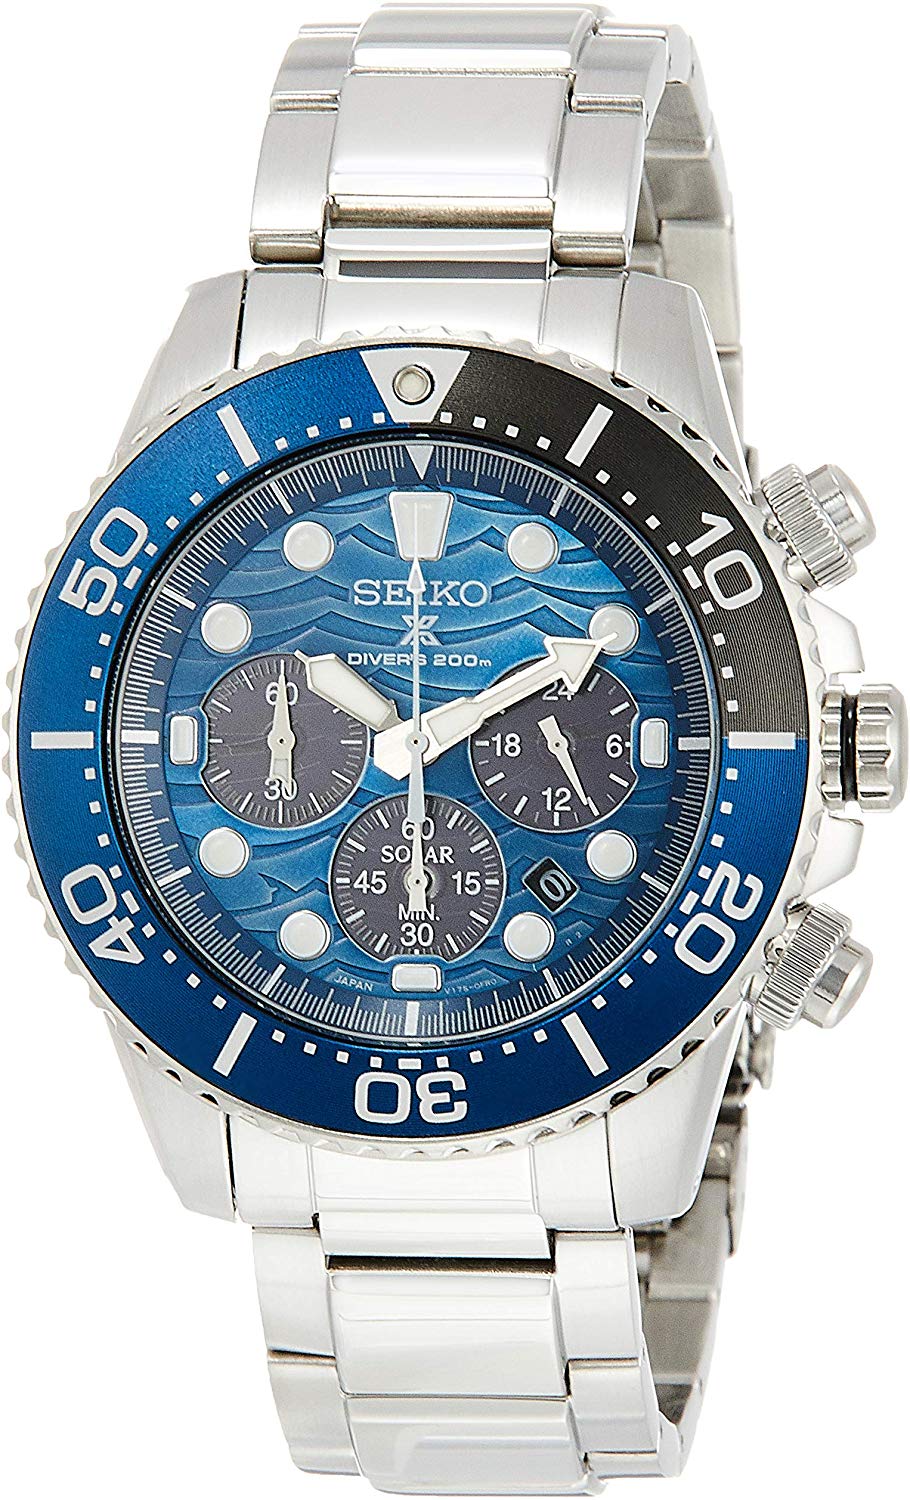 SEIKO PROSPEX Solar Chronograph Save the Ocean Special Edition Blue Dial  SBDL059Men's Silver - Discovery Japan Mall